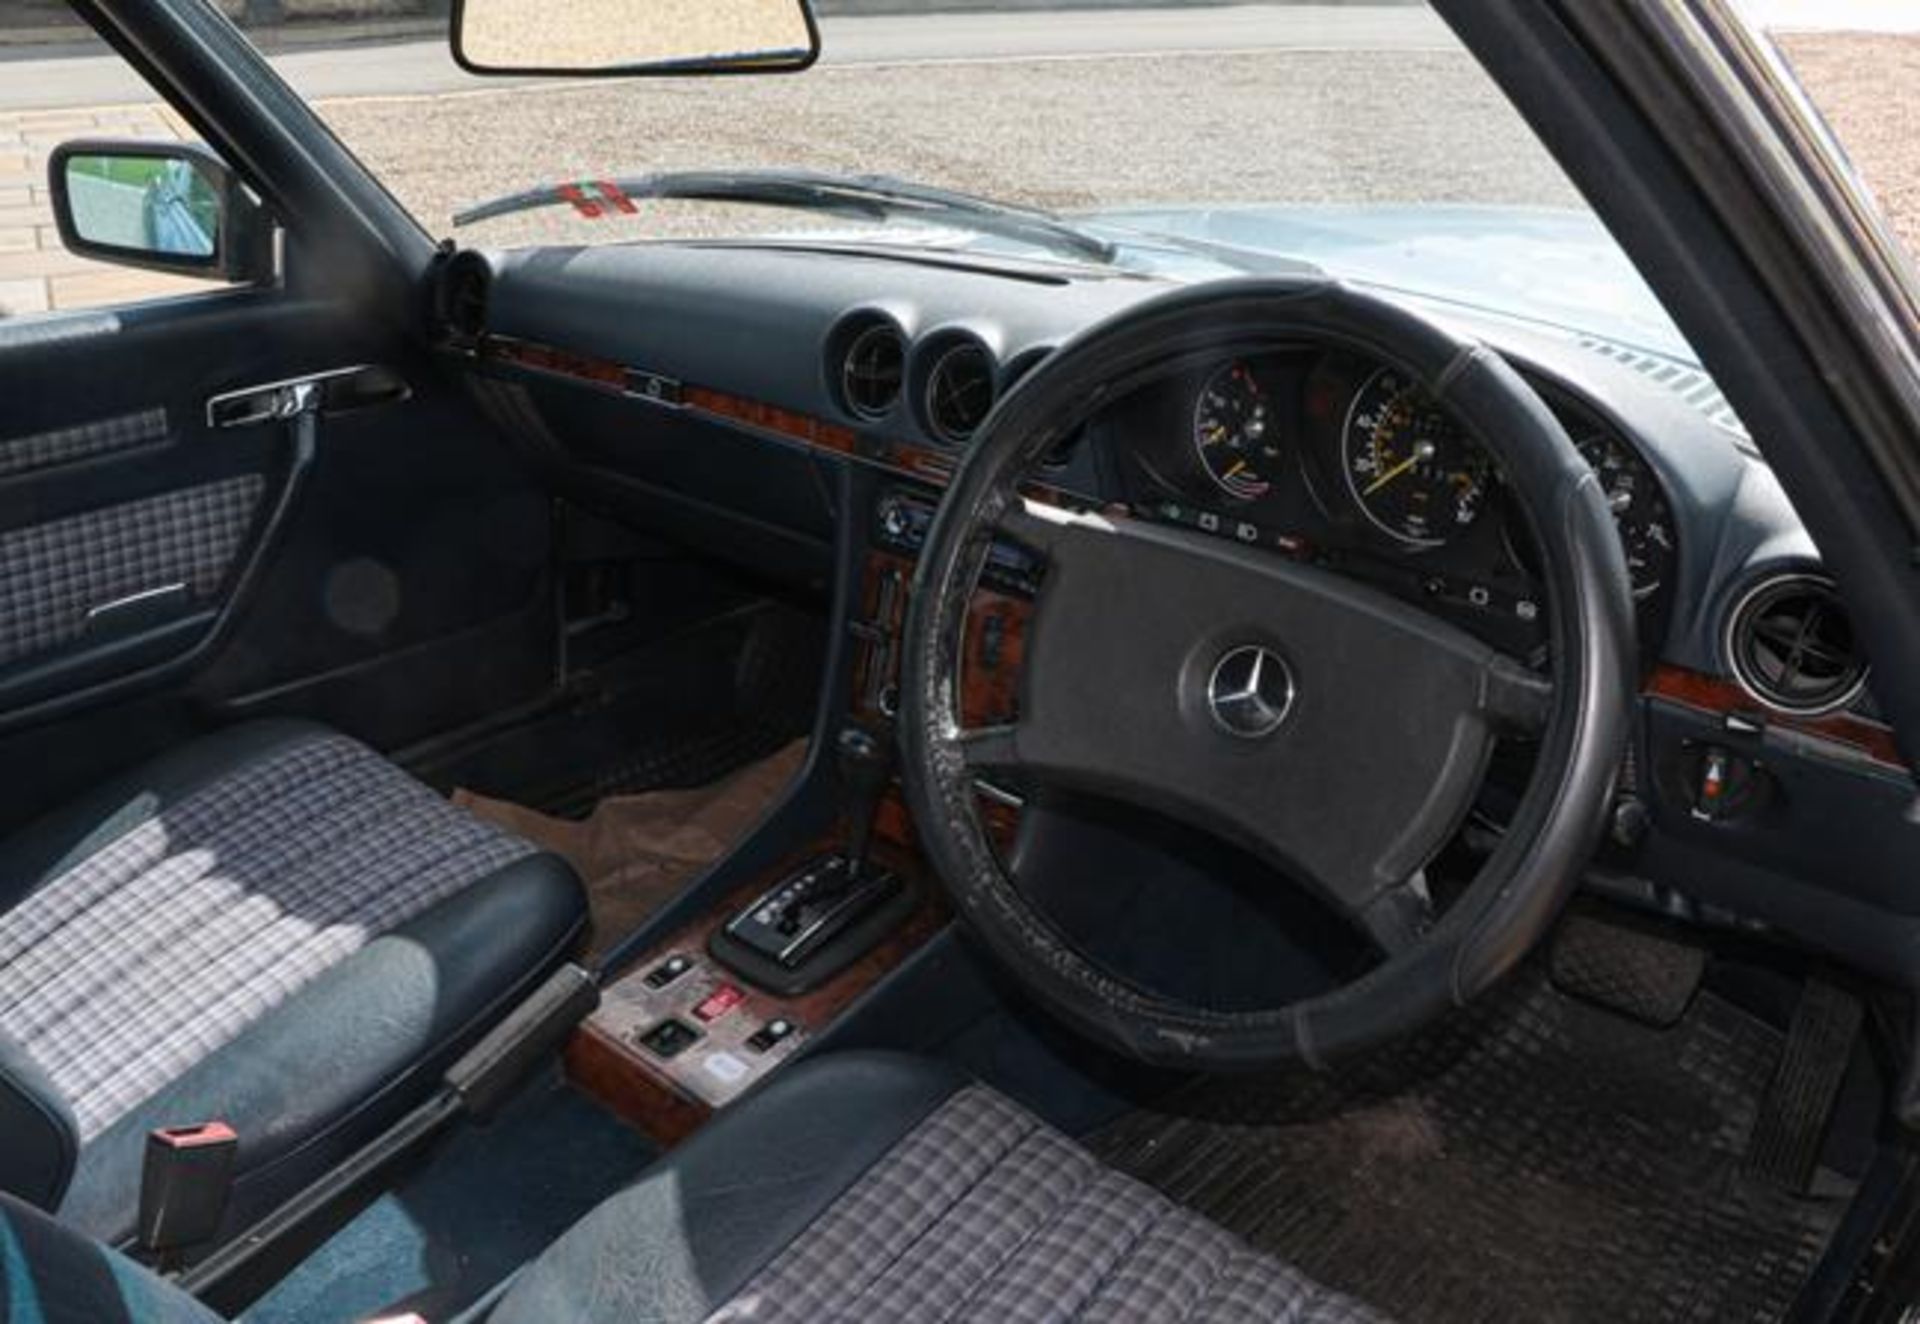 1985 Mercedes 380-SL Auto Convertible Registration number: 862 RTN Date of first registration: 03 01 - Image 3 of 5